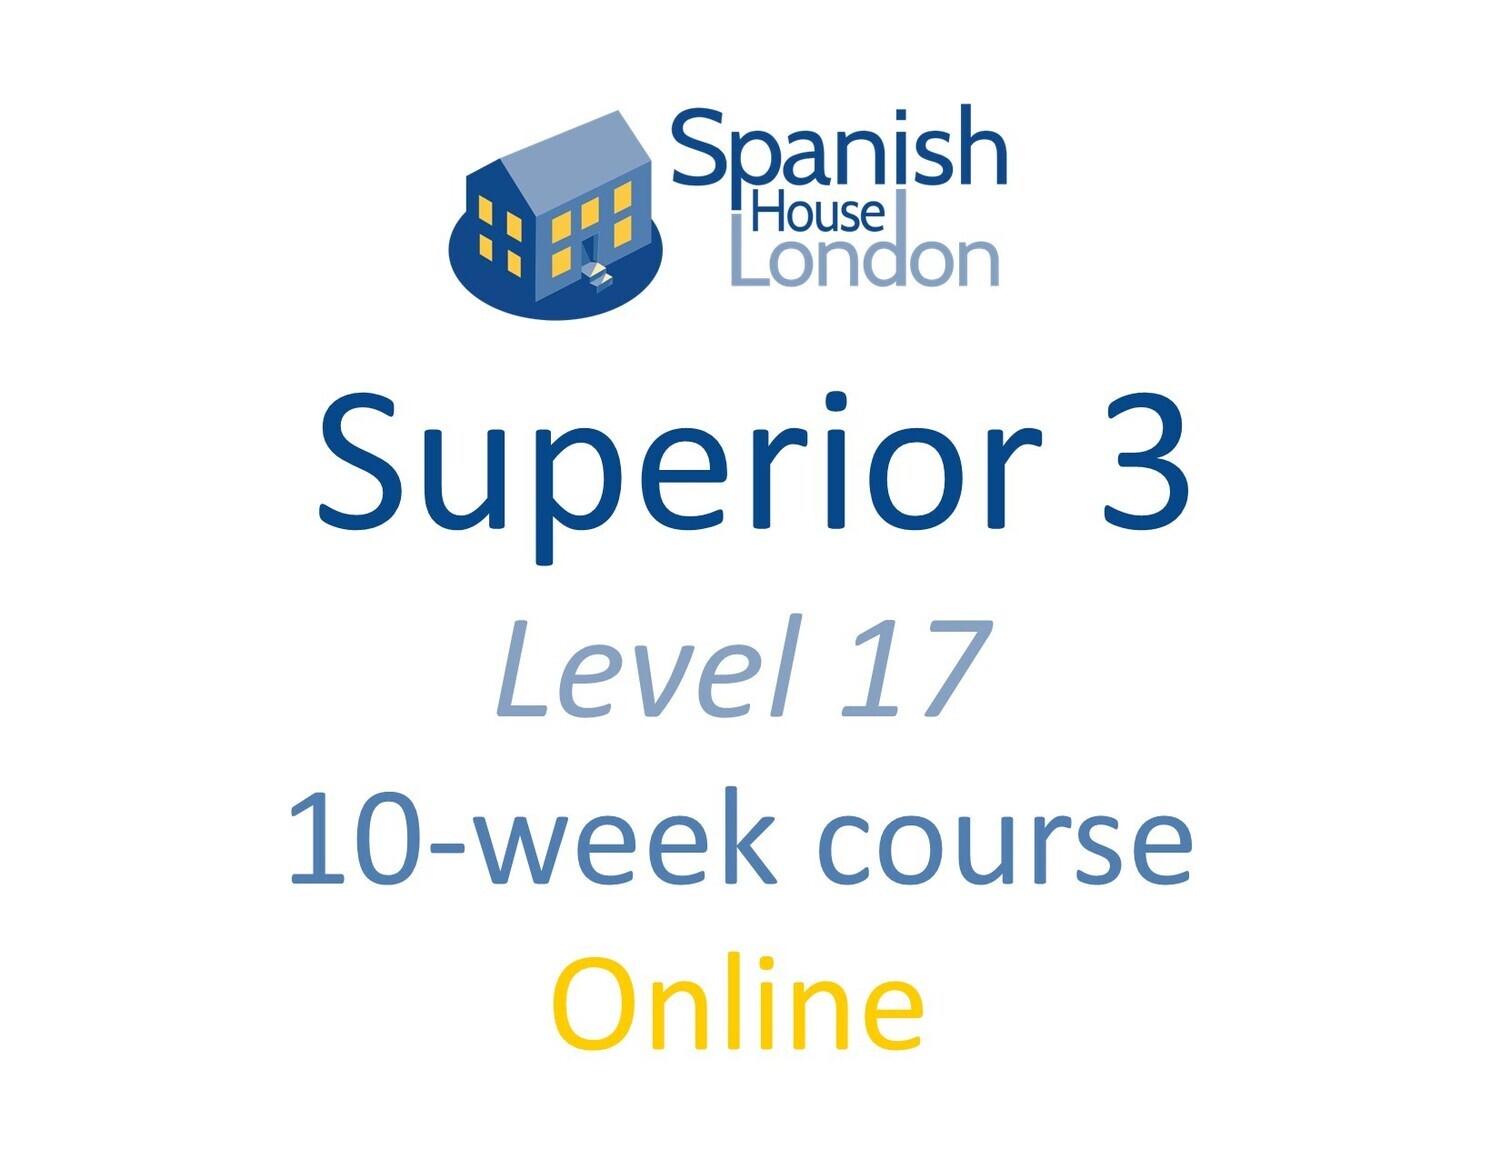 Superior 3 Course starting on 22nd May at 7.30pm Online